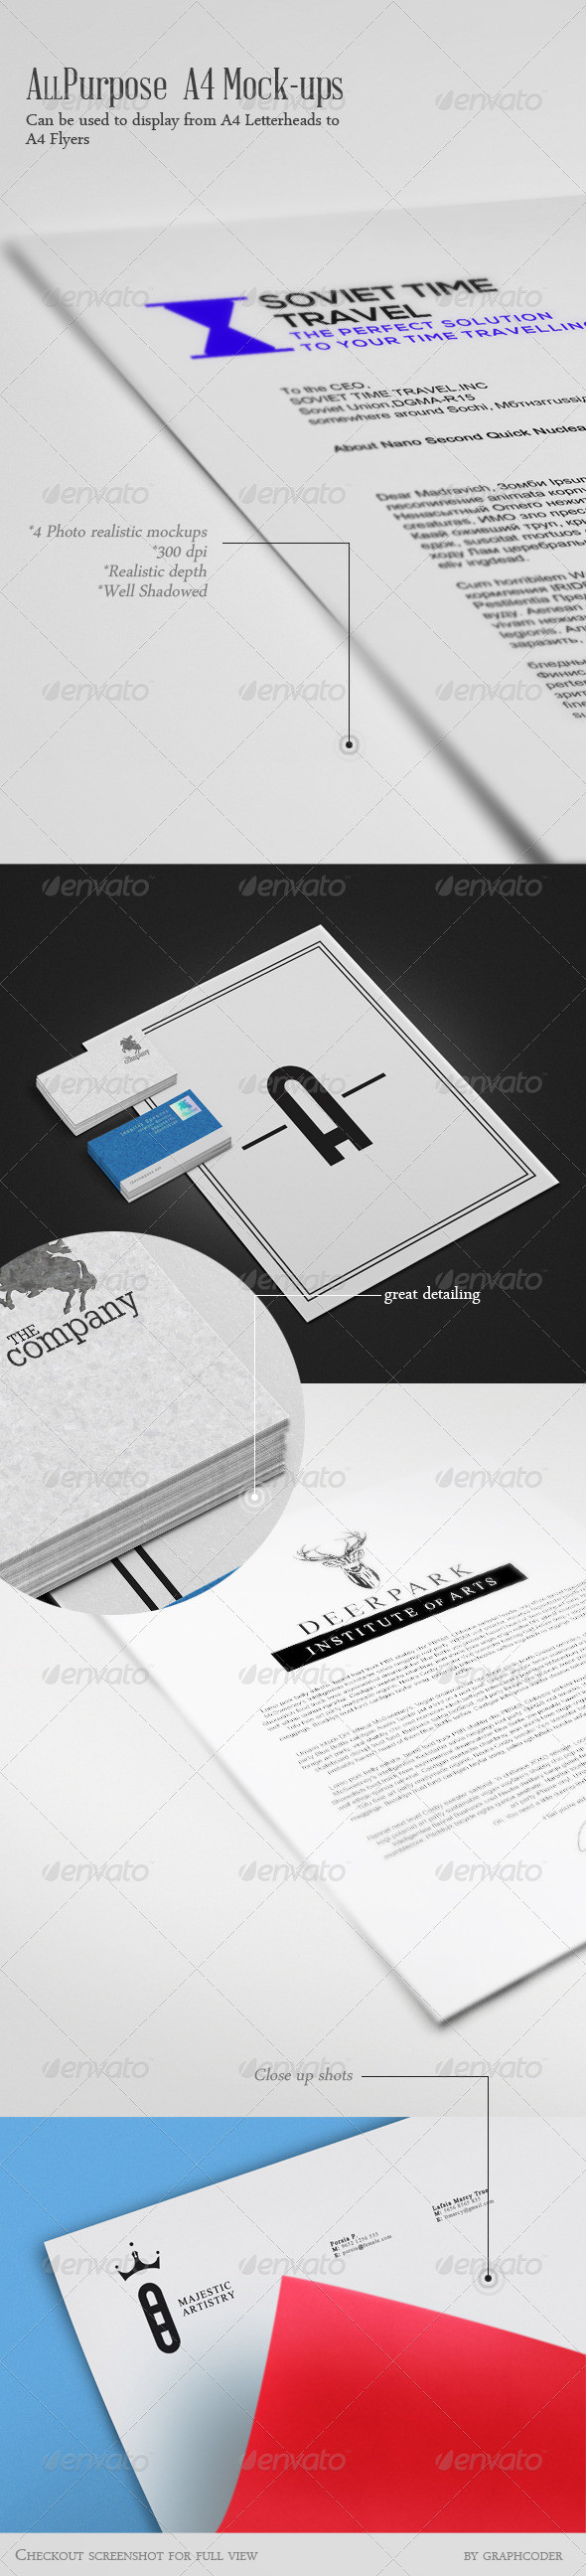 Photo 20realistic 20a4 20mockups 20by 20graphcoder 20preview